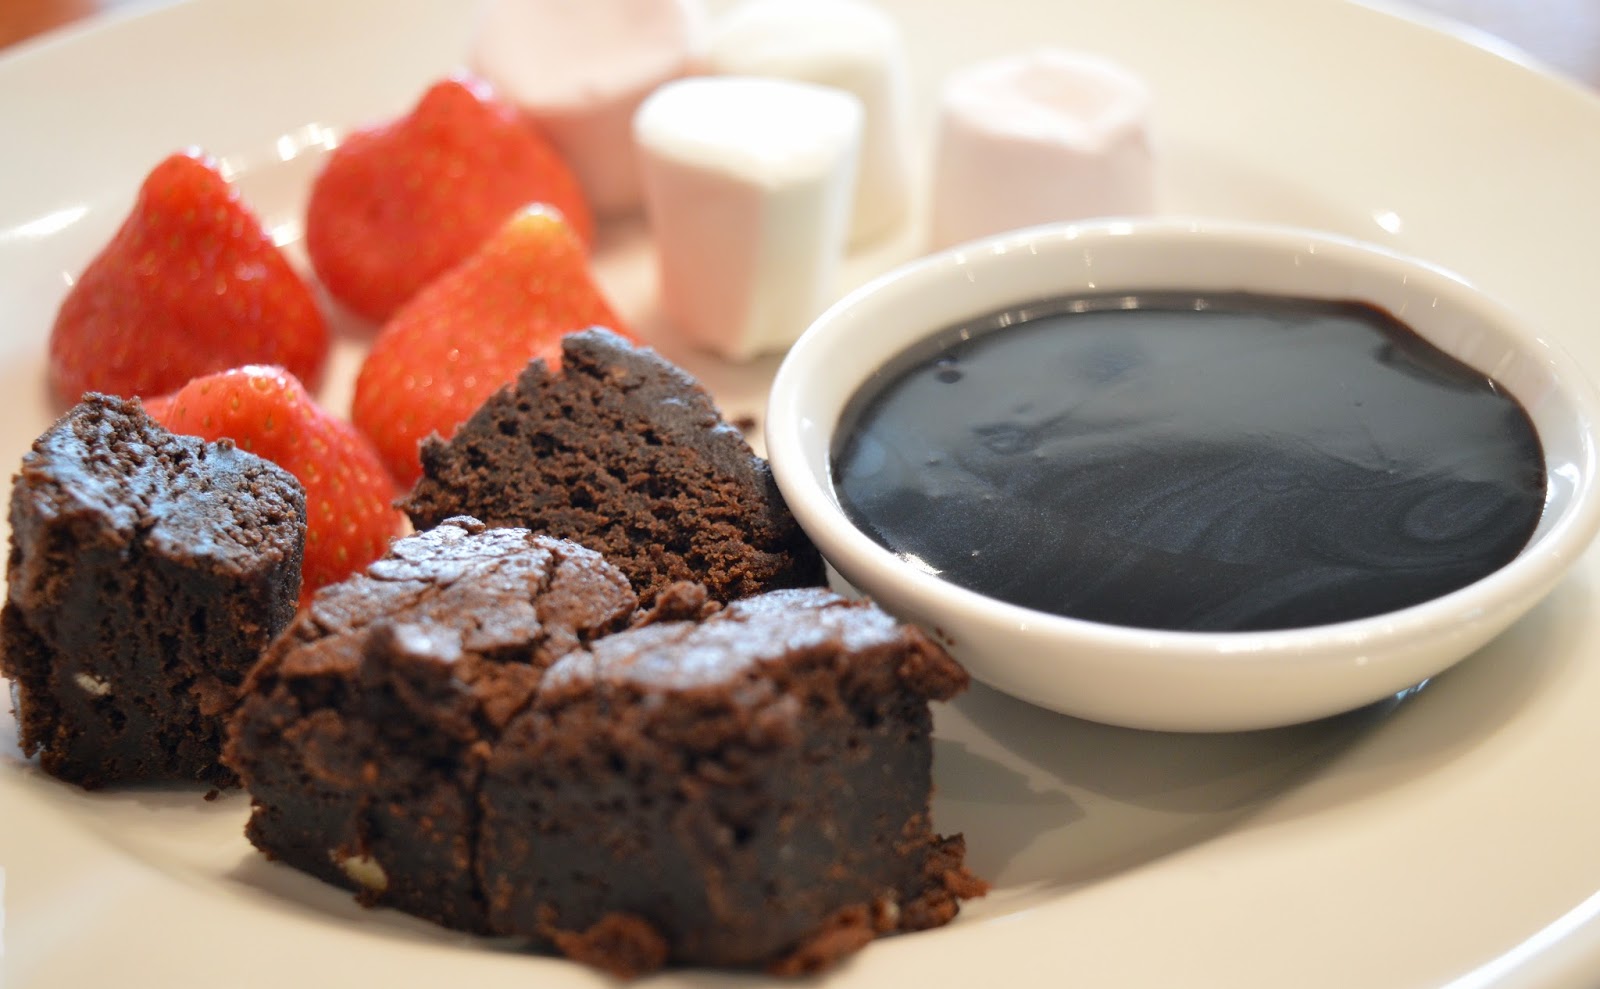 Derwent Crossing Brewers Fayre near intu Metrocentre | Play Area & Children's Menu Review - kids chocolate brownies, strawberries, marshmallows and chocolate dipping sauce